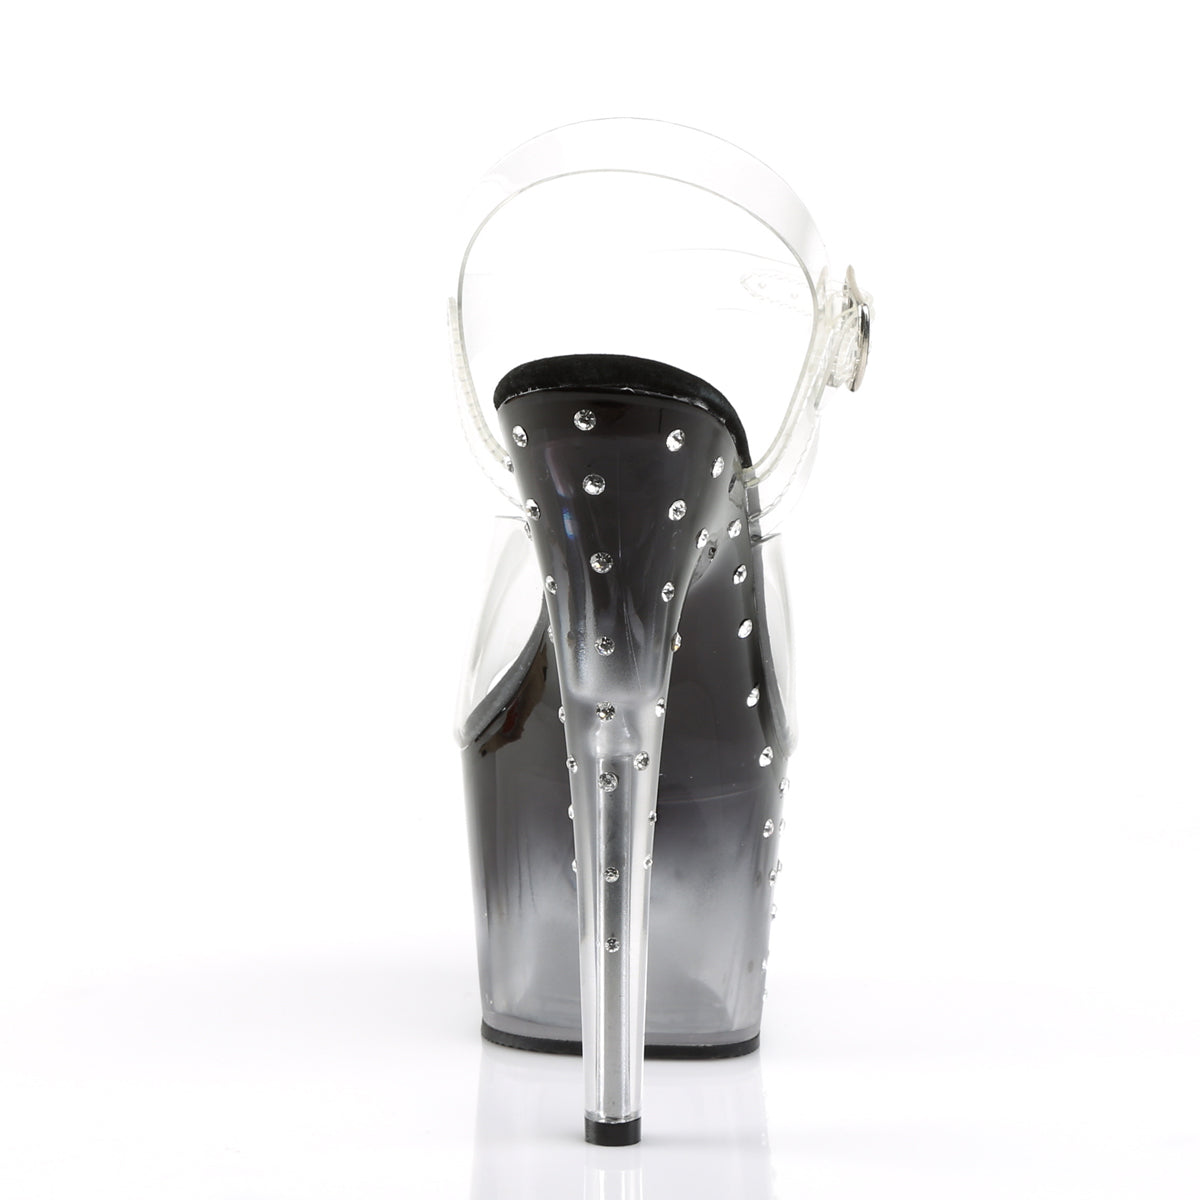 STARDUST-708T 7" Heel Clear and Black Pole Dancing Platforms-Pleaser- Sexy Shoes Fetish Footwear